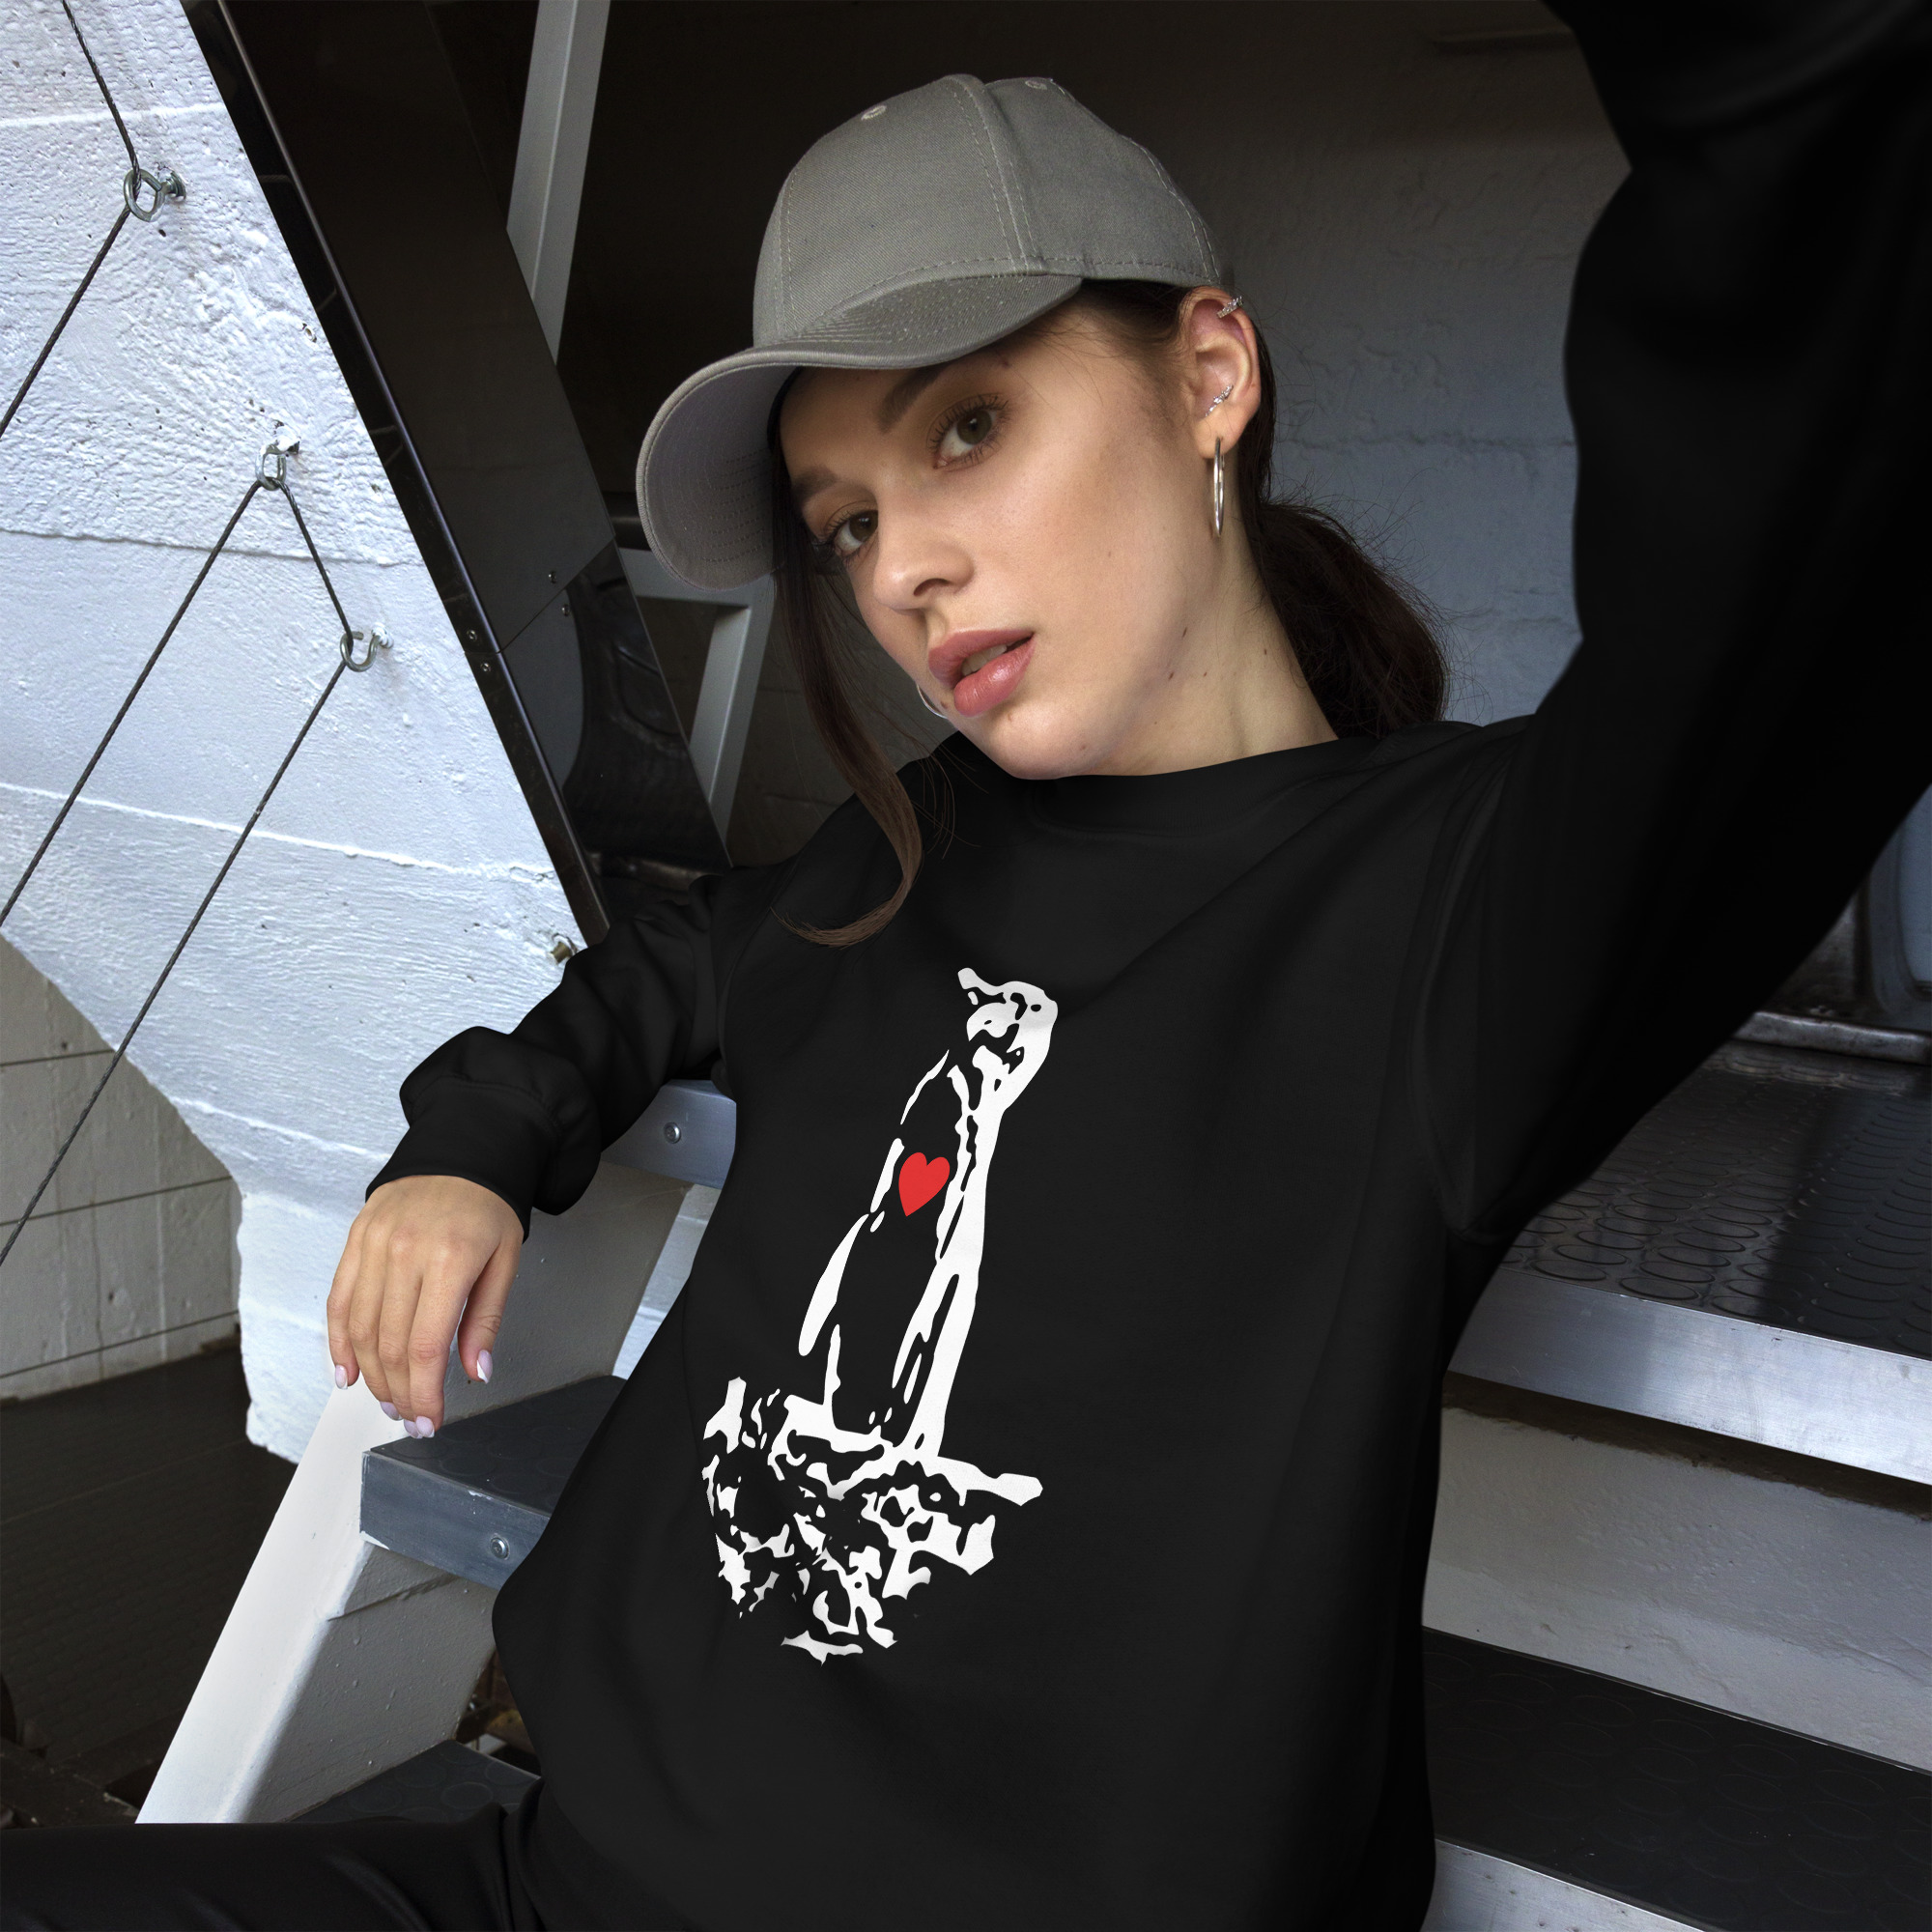 Galapagos Penguin with red heart Sweatshirt